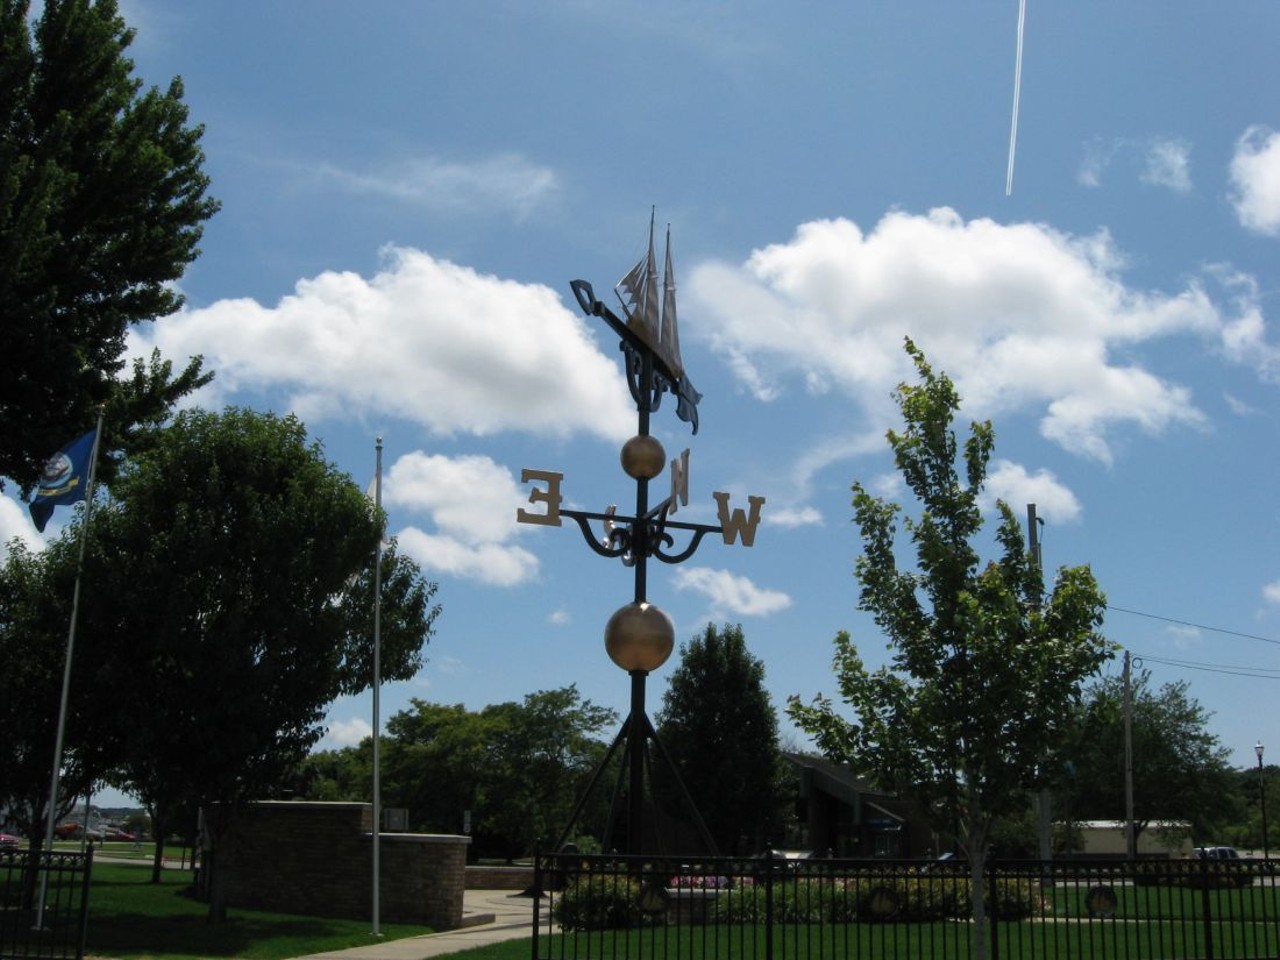 World&#146;s Largest WeathervaneCorner of Dowling & Water Street, 
MontagueMontague, Michigan is home to the world&#146;s largest weather vane, located at the corner of Dowling and Water street. Weighing over 4,000 pounds, the structure stands at 48 feet tall with an arrow measuring 26 feet long. The weather-vane, which is fully functional, has a working weather station with foot access available for visitors to use.
Photo via Bill McChesney / Flickr Creative Commons